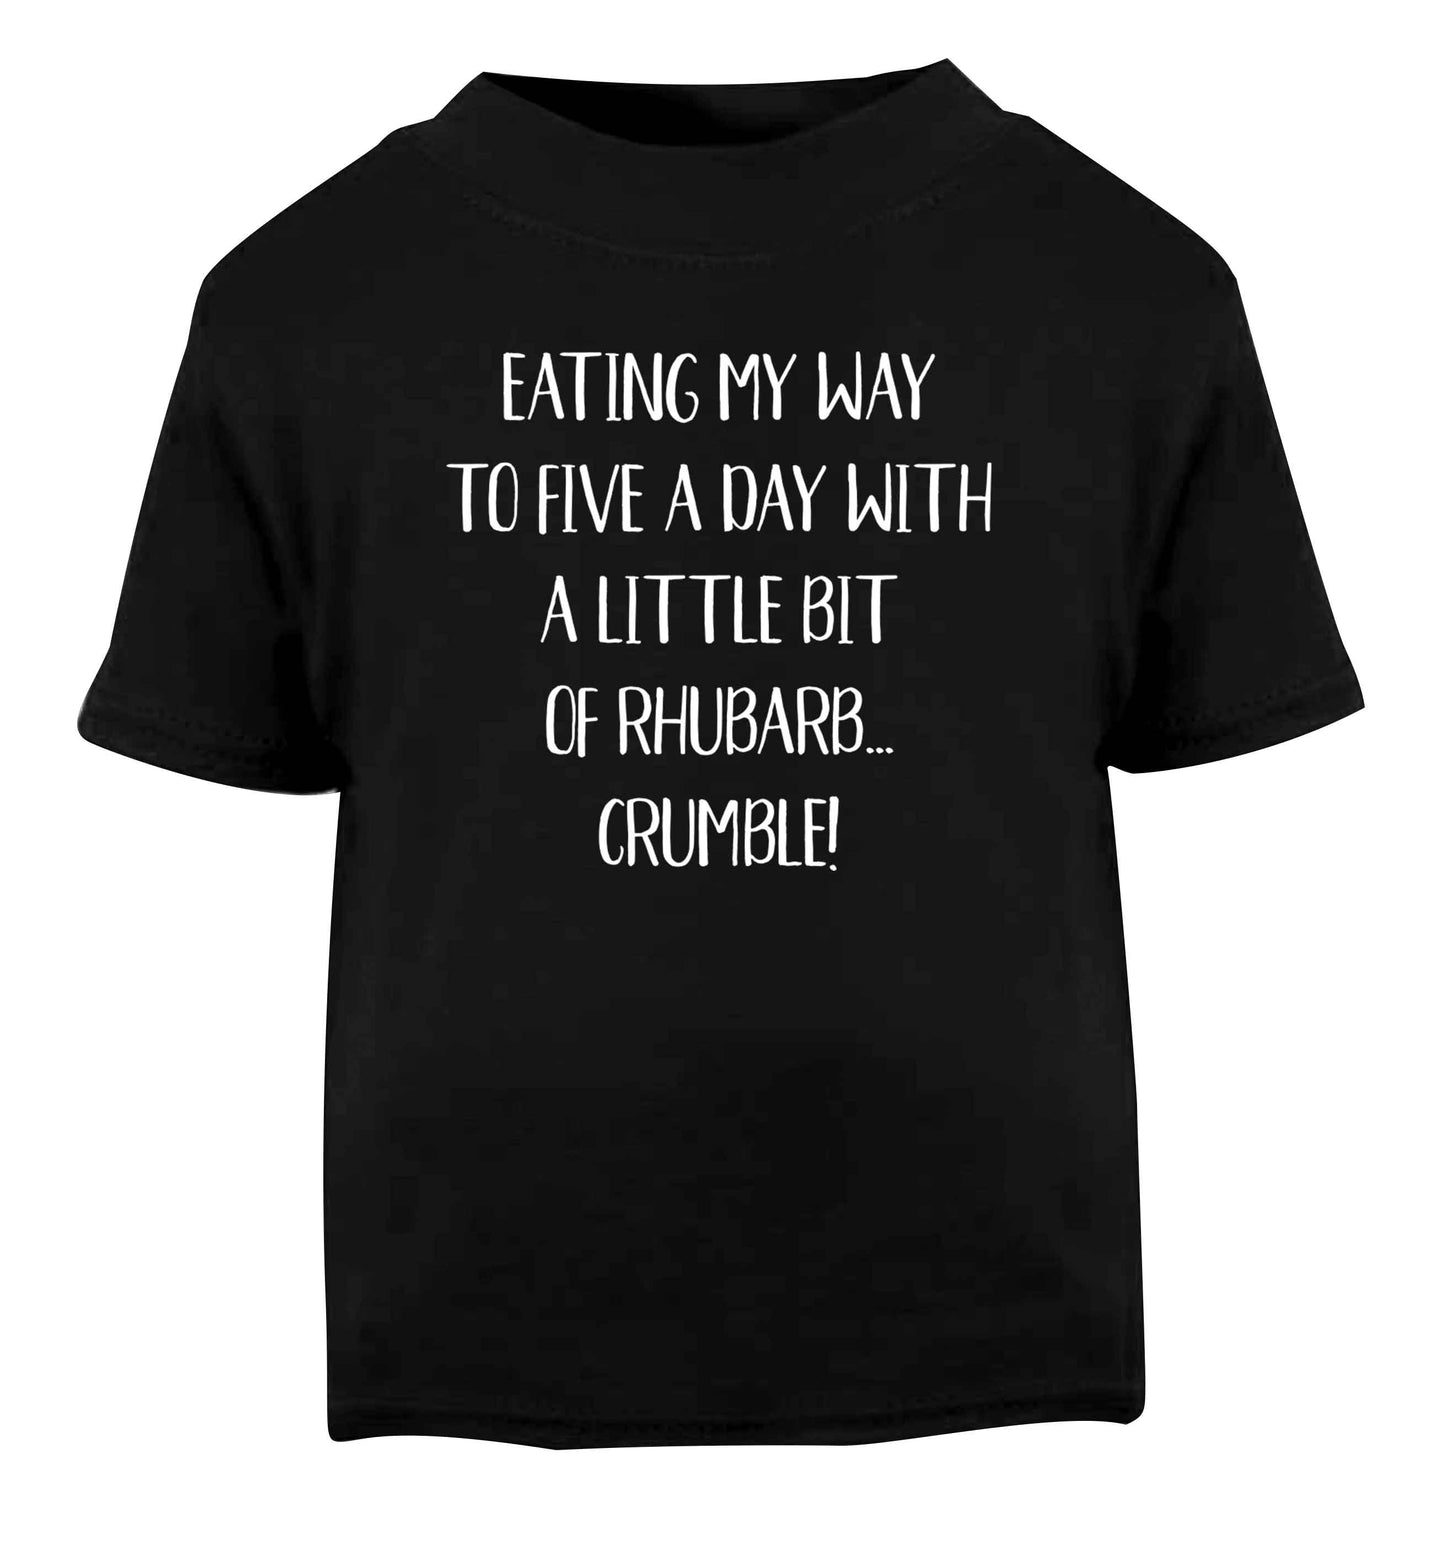 Eating my way to five a day with a little bit of rhubarb crumble Black Baby Toddler Tshirt 2 years